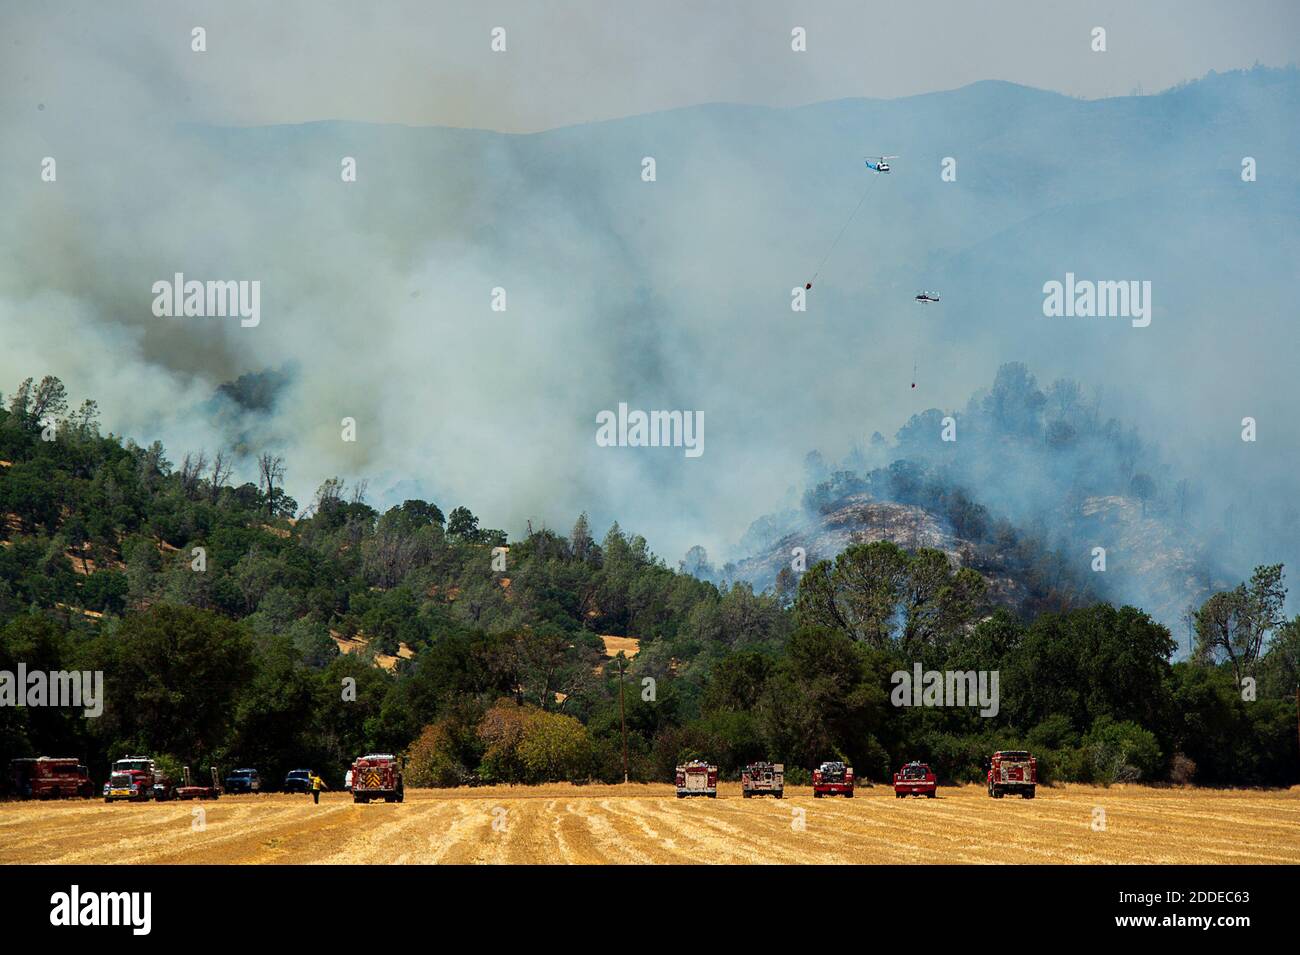 NO FILM, NO VIDEO, NO TV, NO DOCUMENTARY - Helicopters drop water, attacking the County Fire, which has burned more than 22,000 acres without containment, on Sunday, July 1, 2018 in Capay Valley, CA, USA. Photo by Paul Kitagaki Jr./Sacramento Bee/TNS/ABACAPRESS.COM Stock Photo